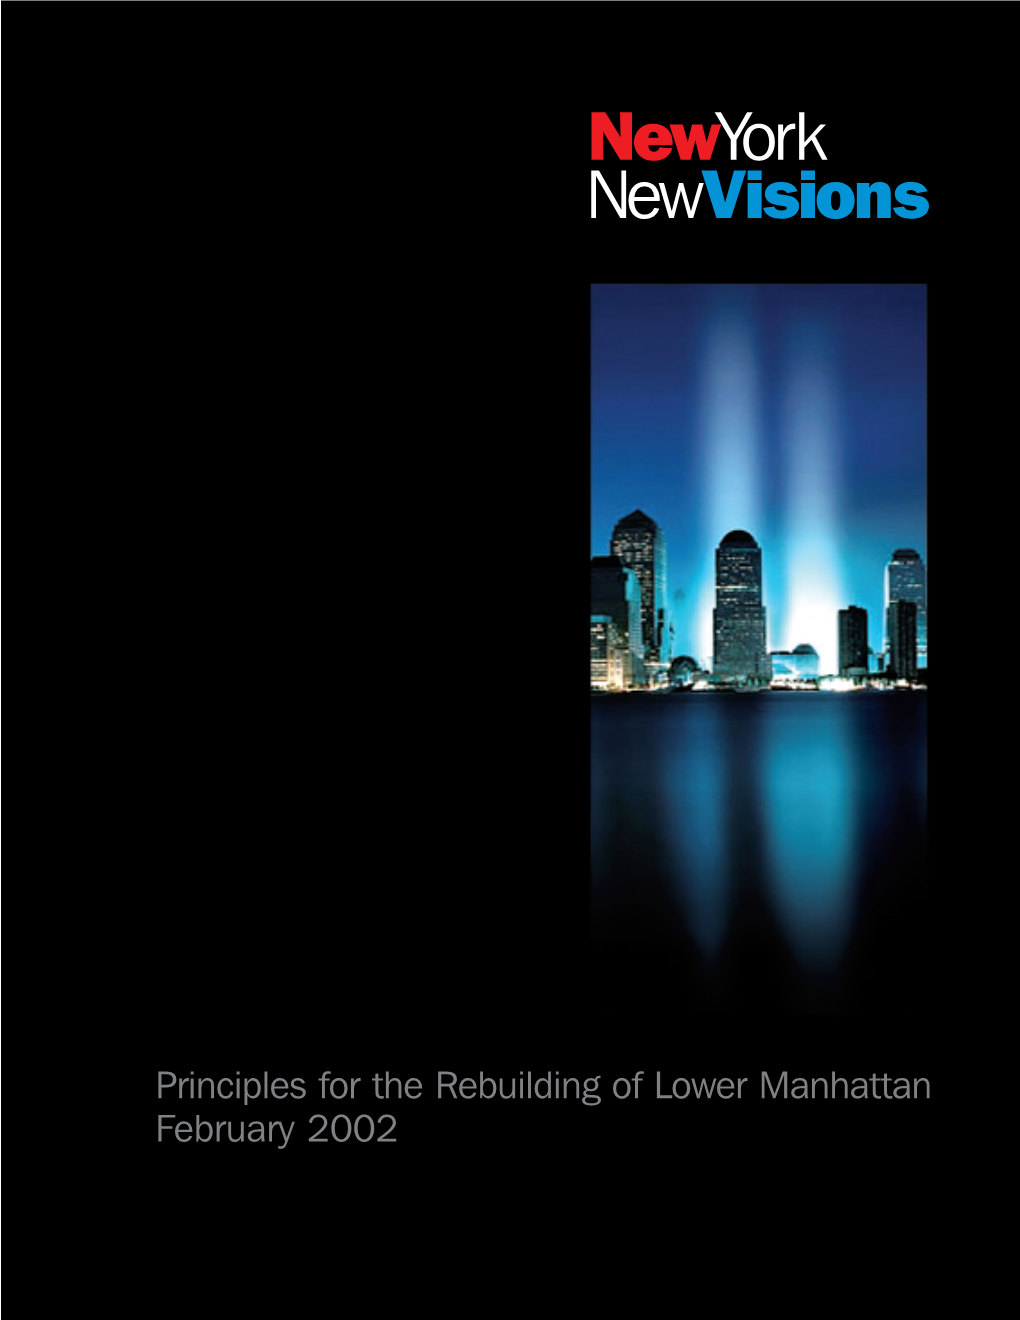 Principles for the Rebuilding of Lower Manhattan February 2002